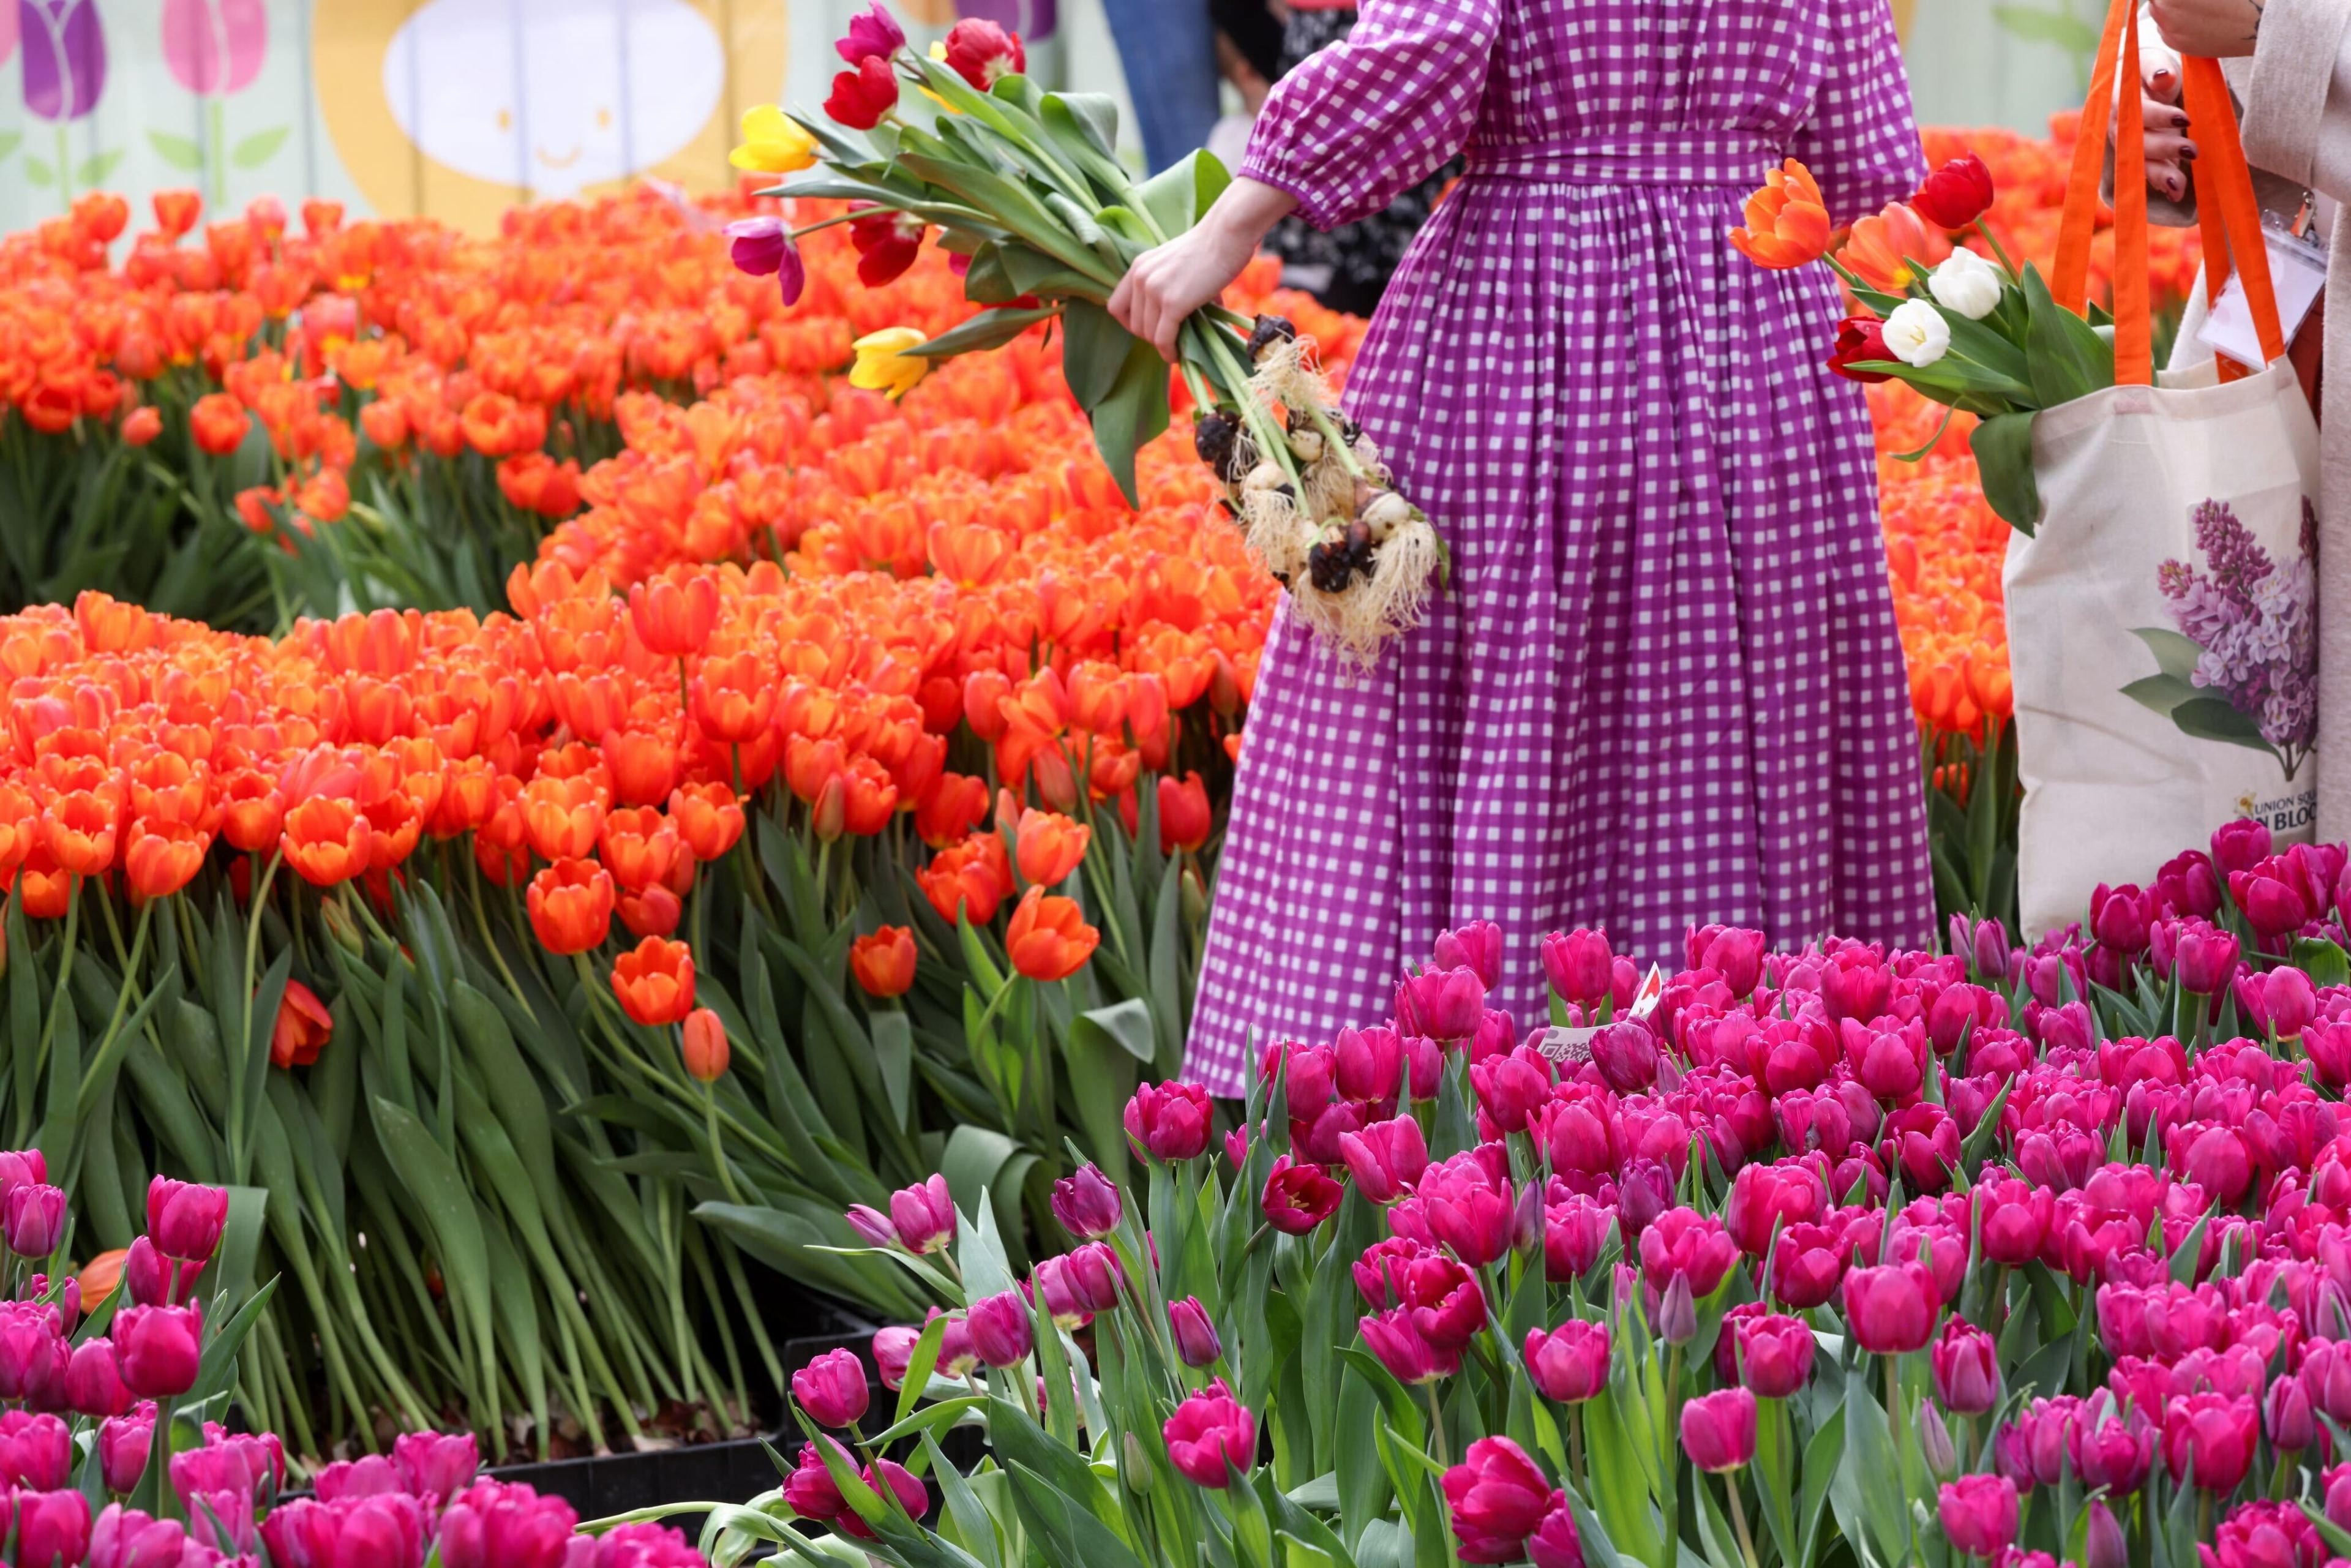 A person in a checkered dress holds tulips amidst vibrant orange and pink tulip beds.